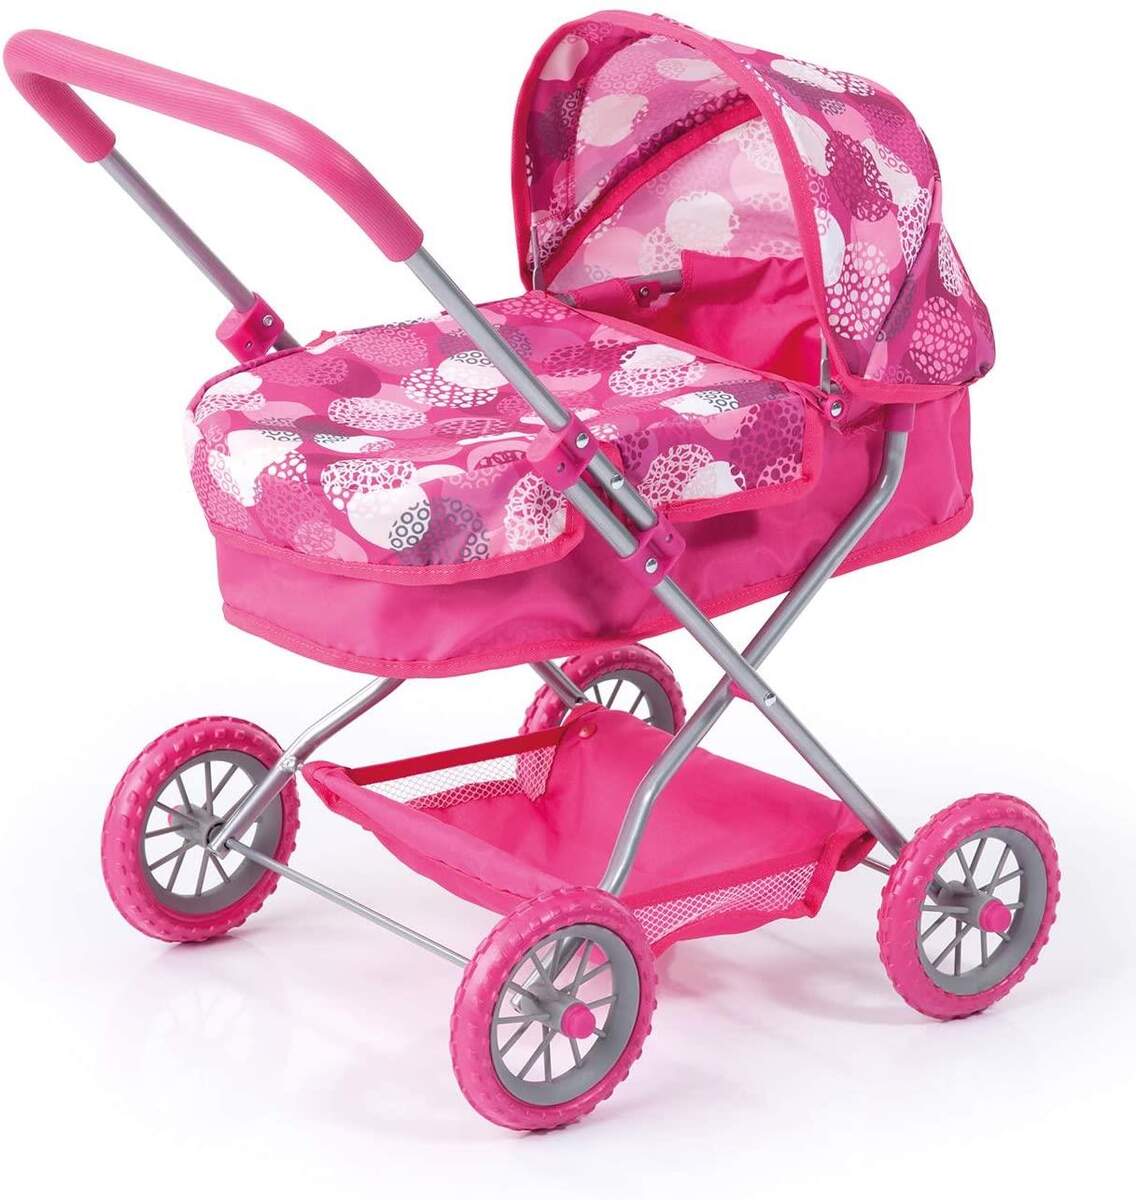 Bayer Chic Puppenwagen Smarty, pink